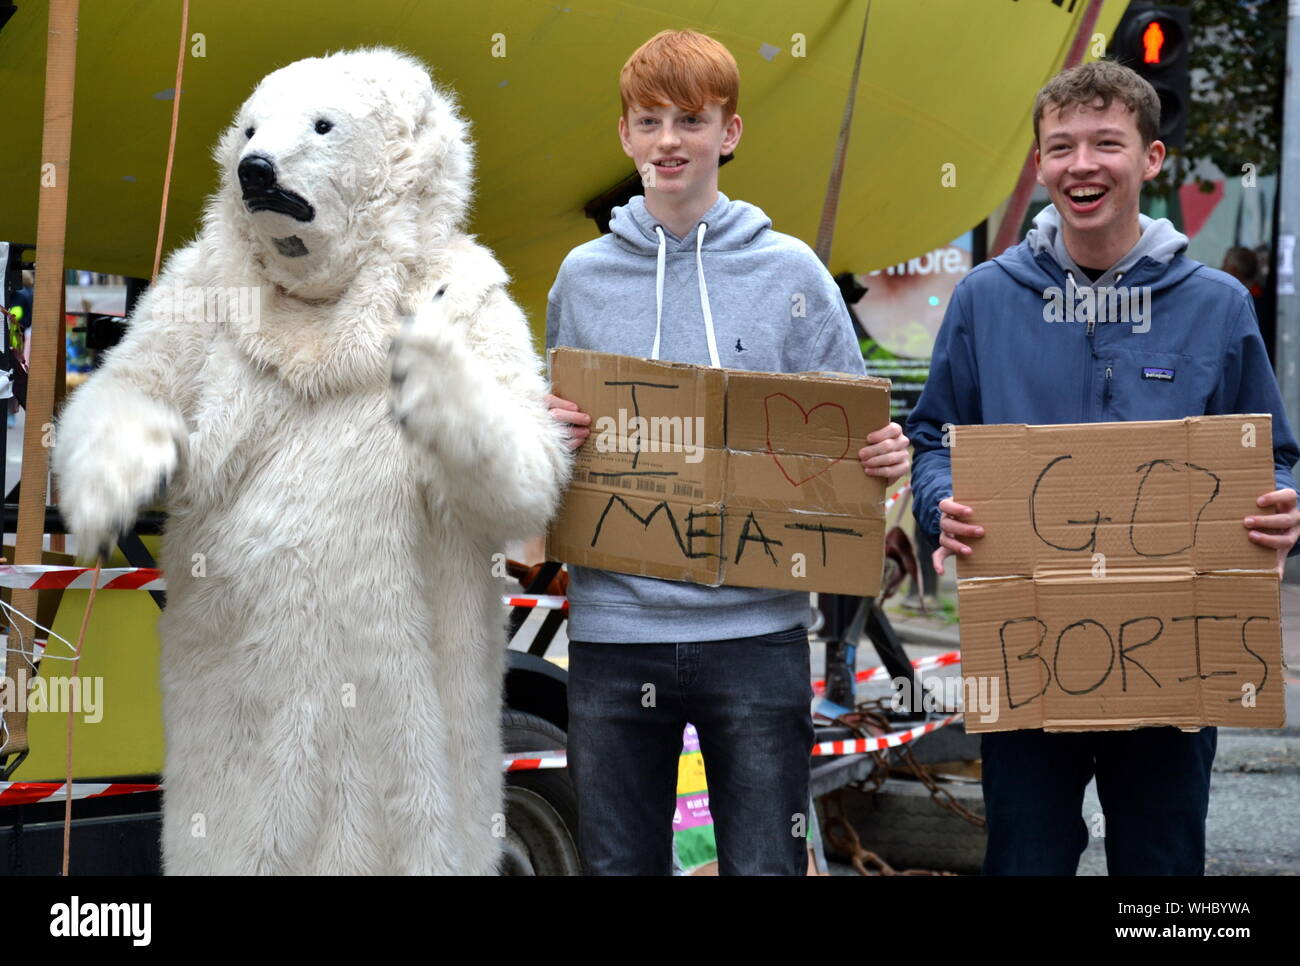 A person in a polar bear suit on Deansgate with young men holding ironic messages: 'I Love Meat' and 'Go Boris'. Northern Rebellion protesters, part of the global movement Extinction Rebellion, marched through Manchester, uk, and held a series of die-ins to urge for action on climate change on September 2nd, 2019. Protest sites included Barclays Bank, a Primark store and HSBC Bank. This was the fourth day of a protest which blocked Deansgate, a main road in central Manchester. Stock Photo